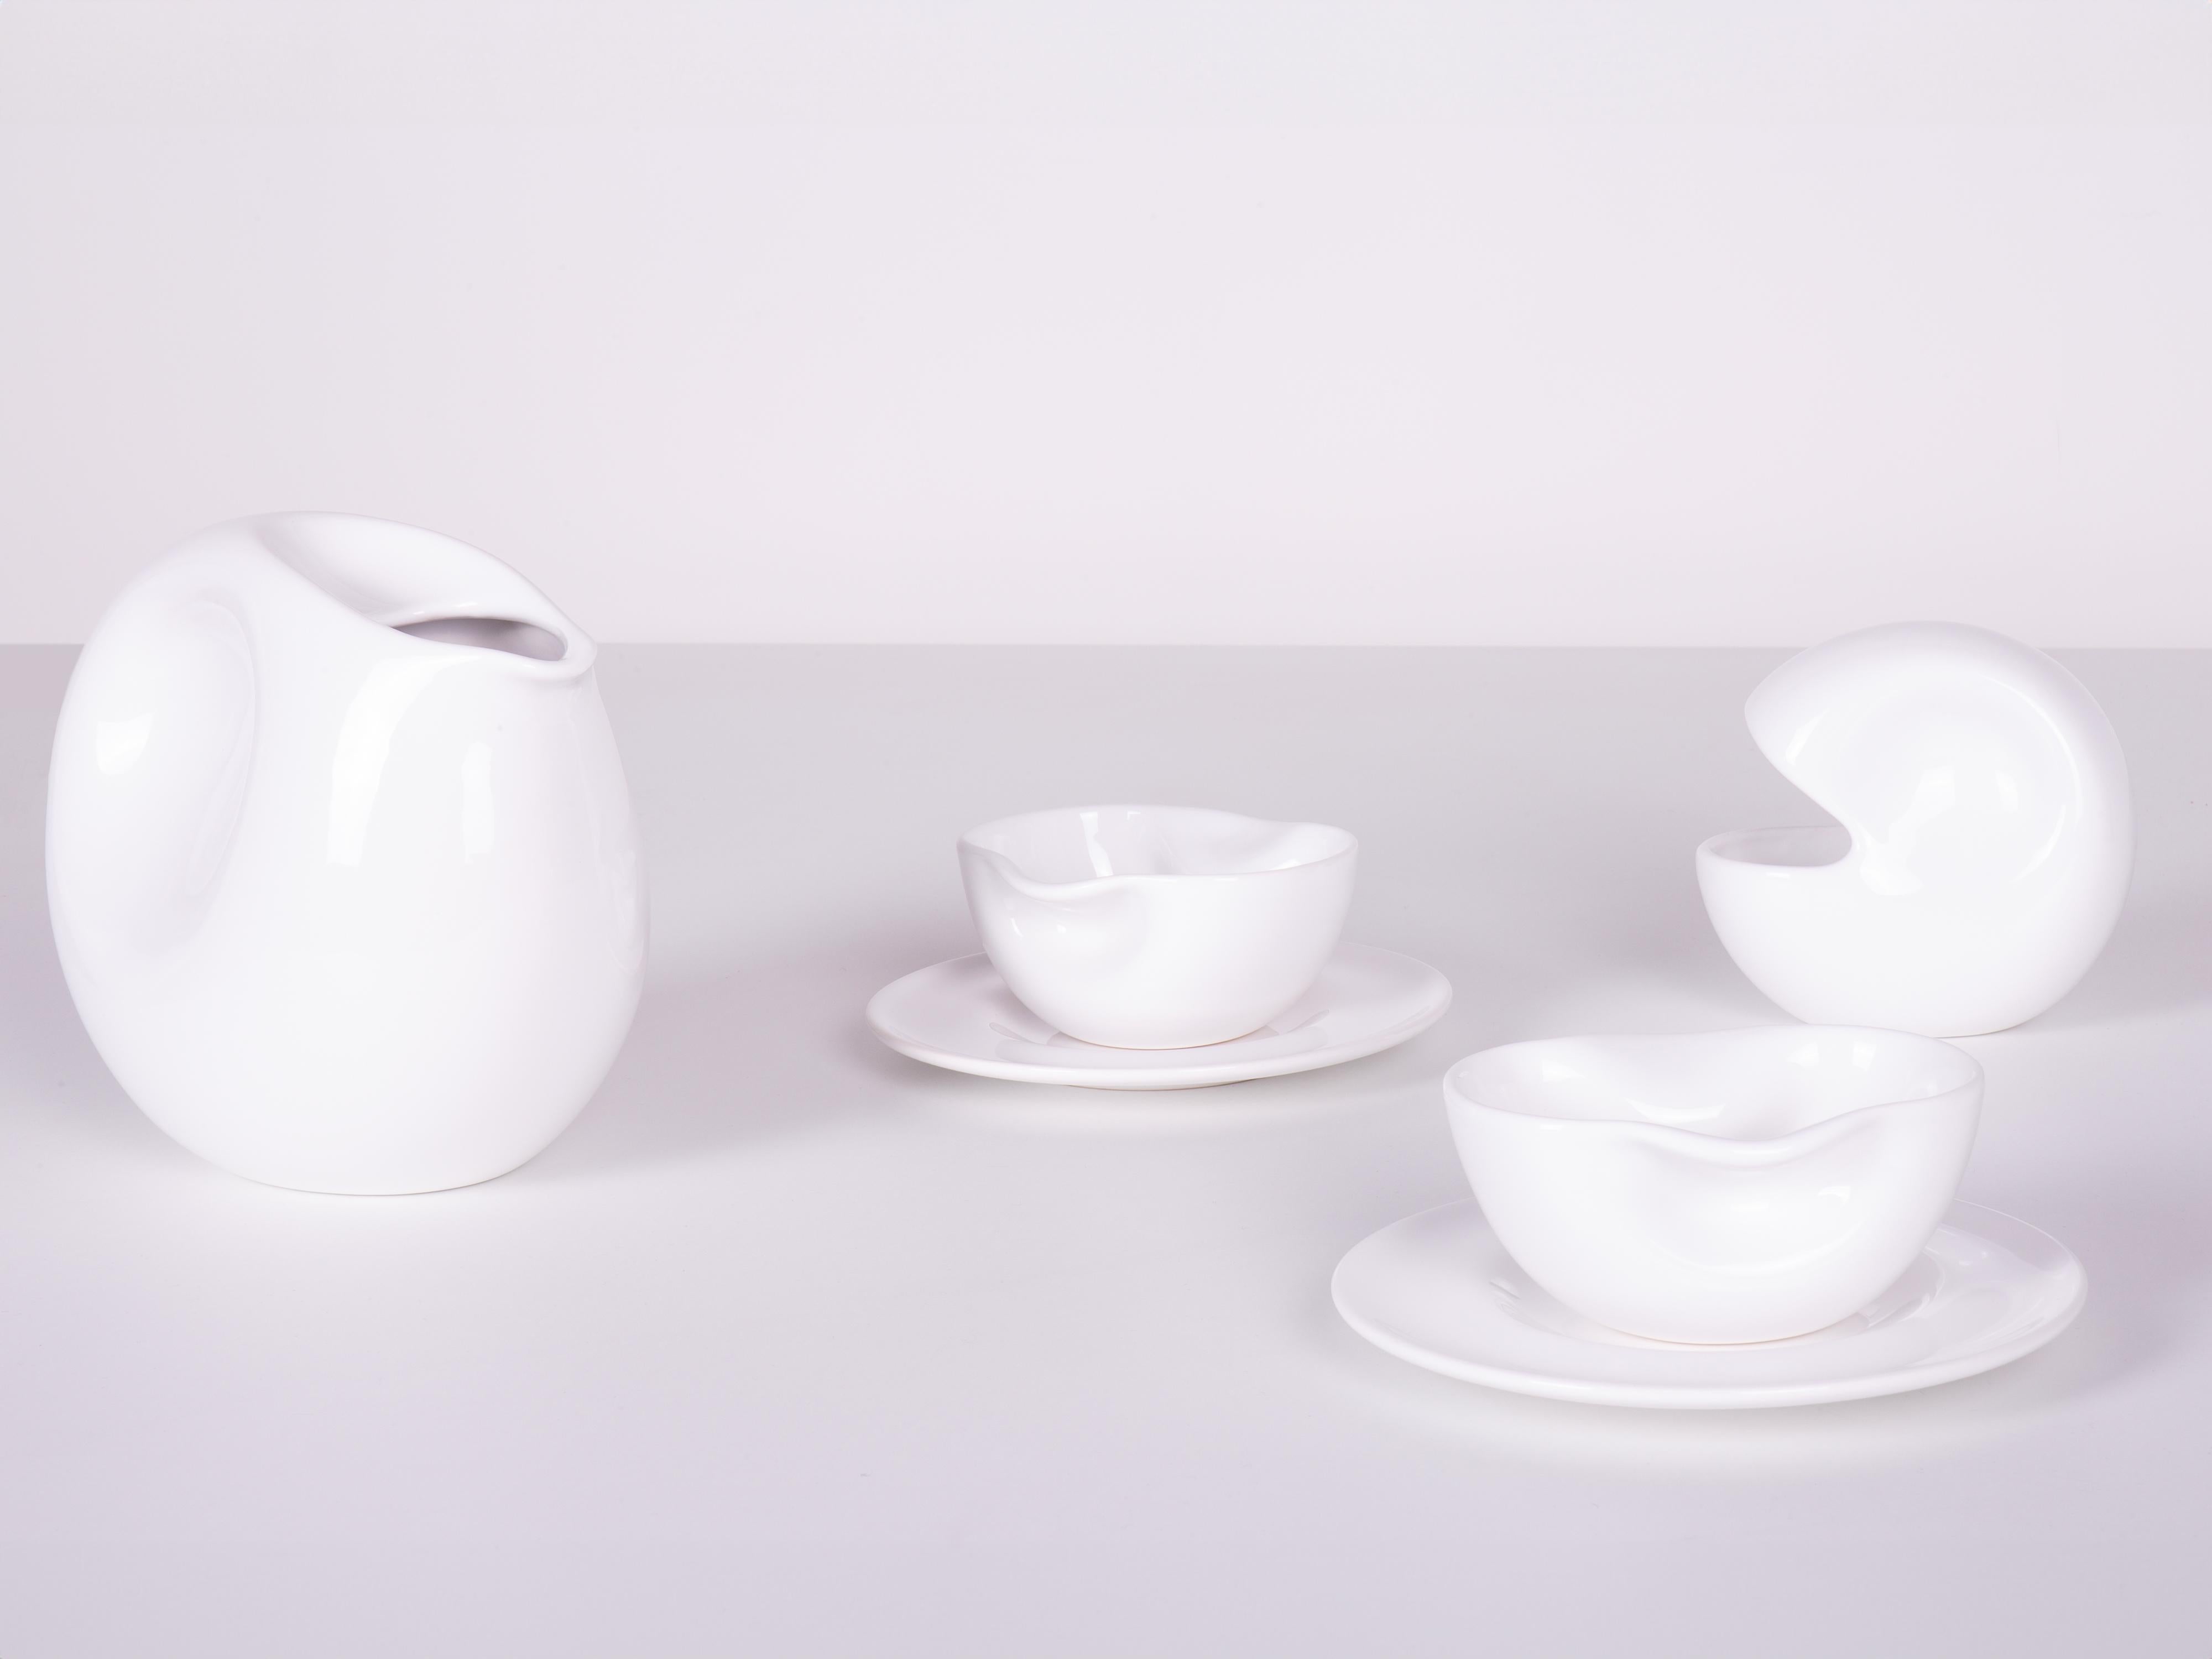 Designed in 1975 - Paradisoterrestre Edition 2023

Material: enameled pottery

Colours: white; also available in mint green or pink.

The tea set designed by Italian artist Augusto Betti in 1975 consists of 1 teapot, 1 sugar bowl, 2 cups and 2